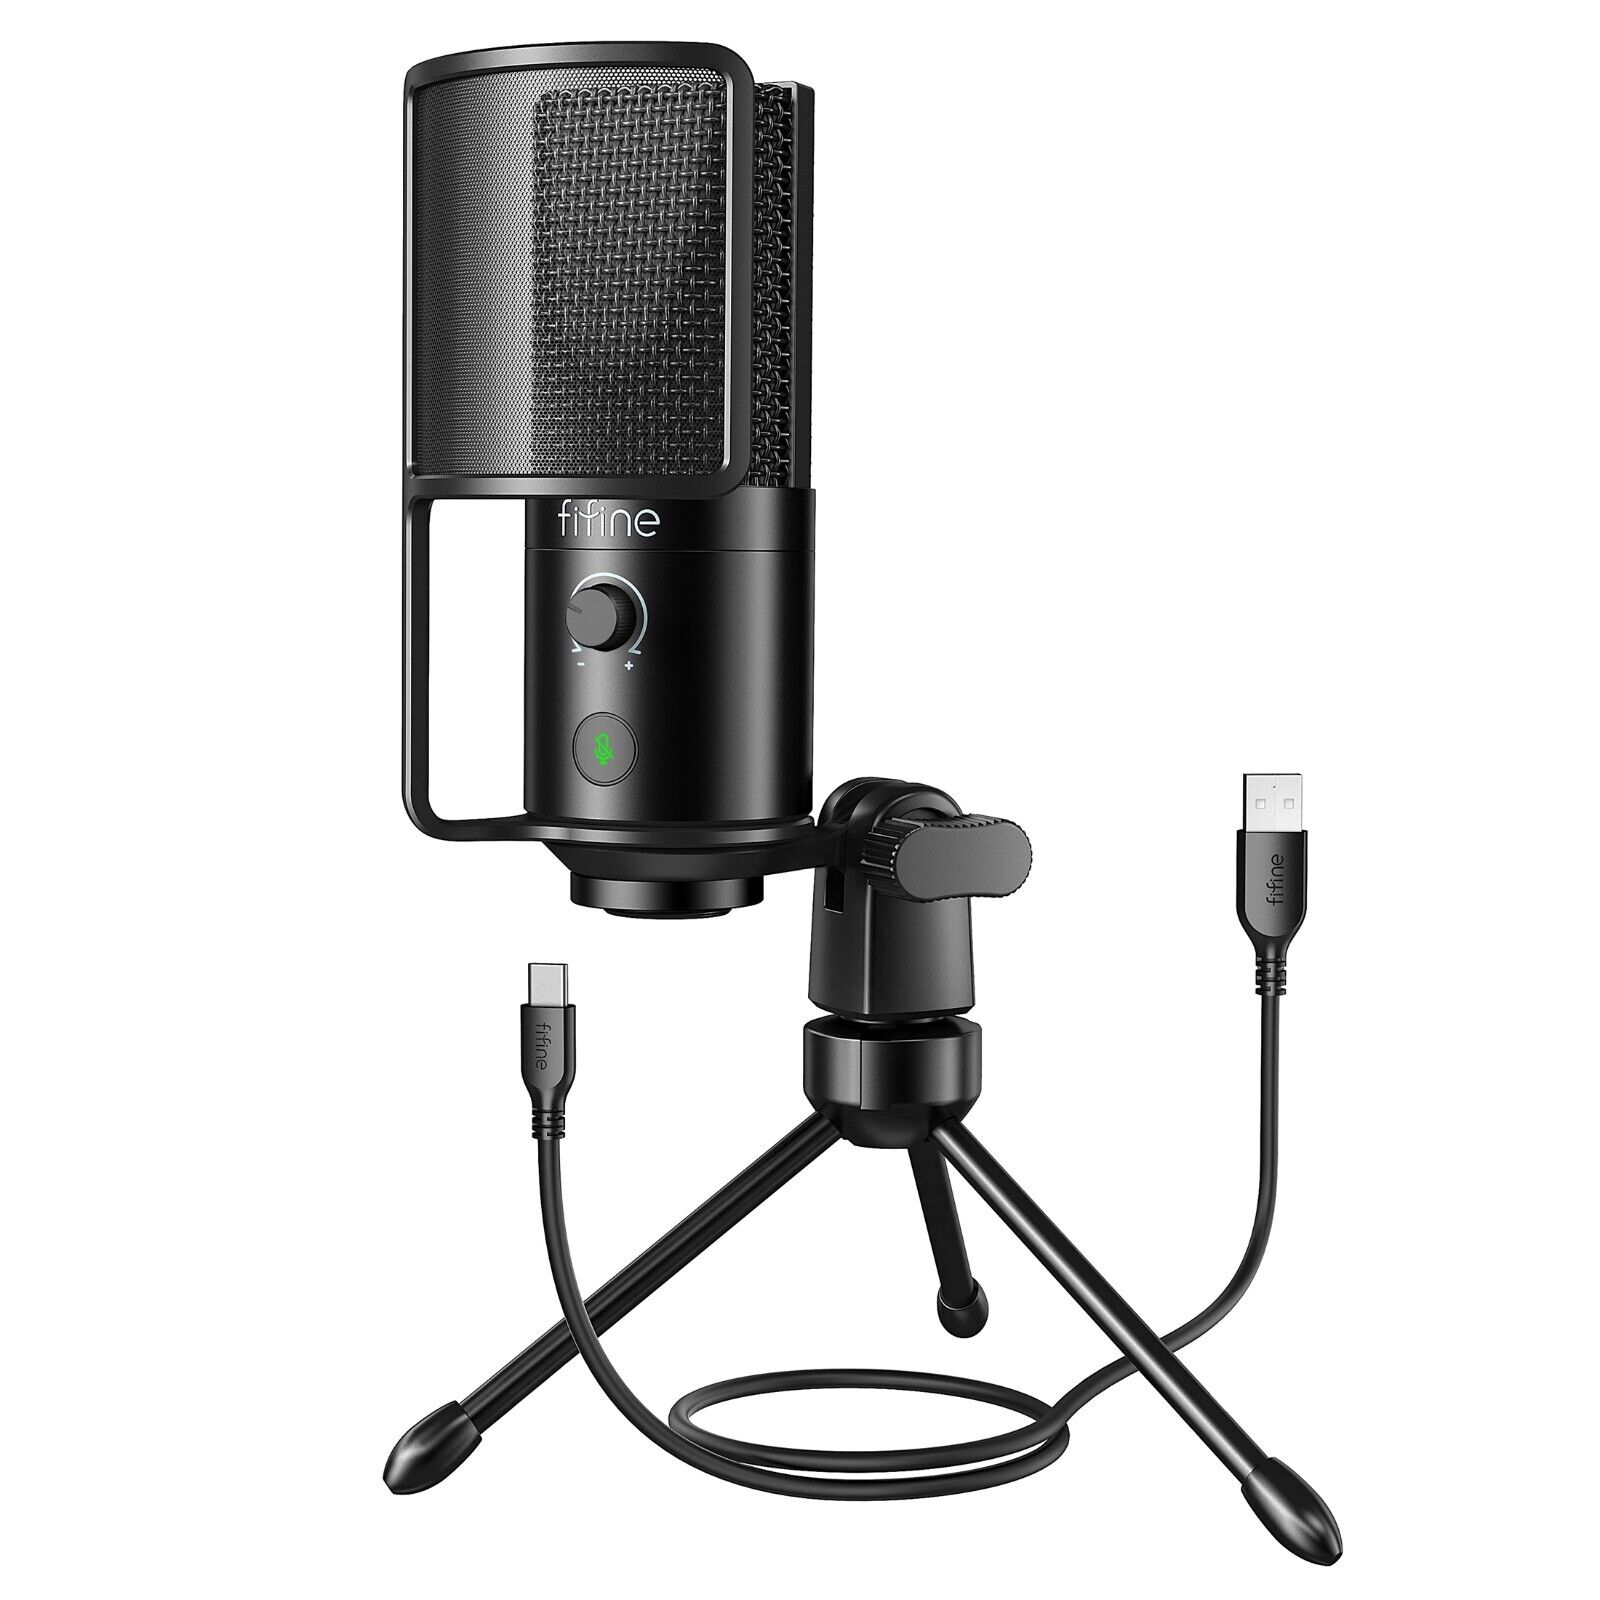 FIFINE USB Condenser Podcast Microphone for Studio Recording Streaming Gaming